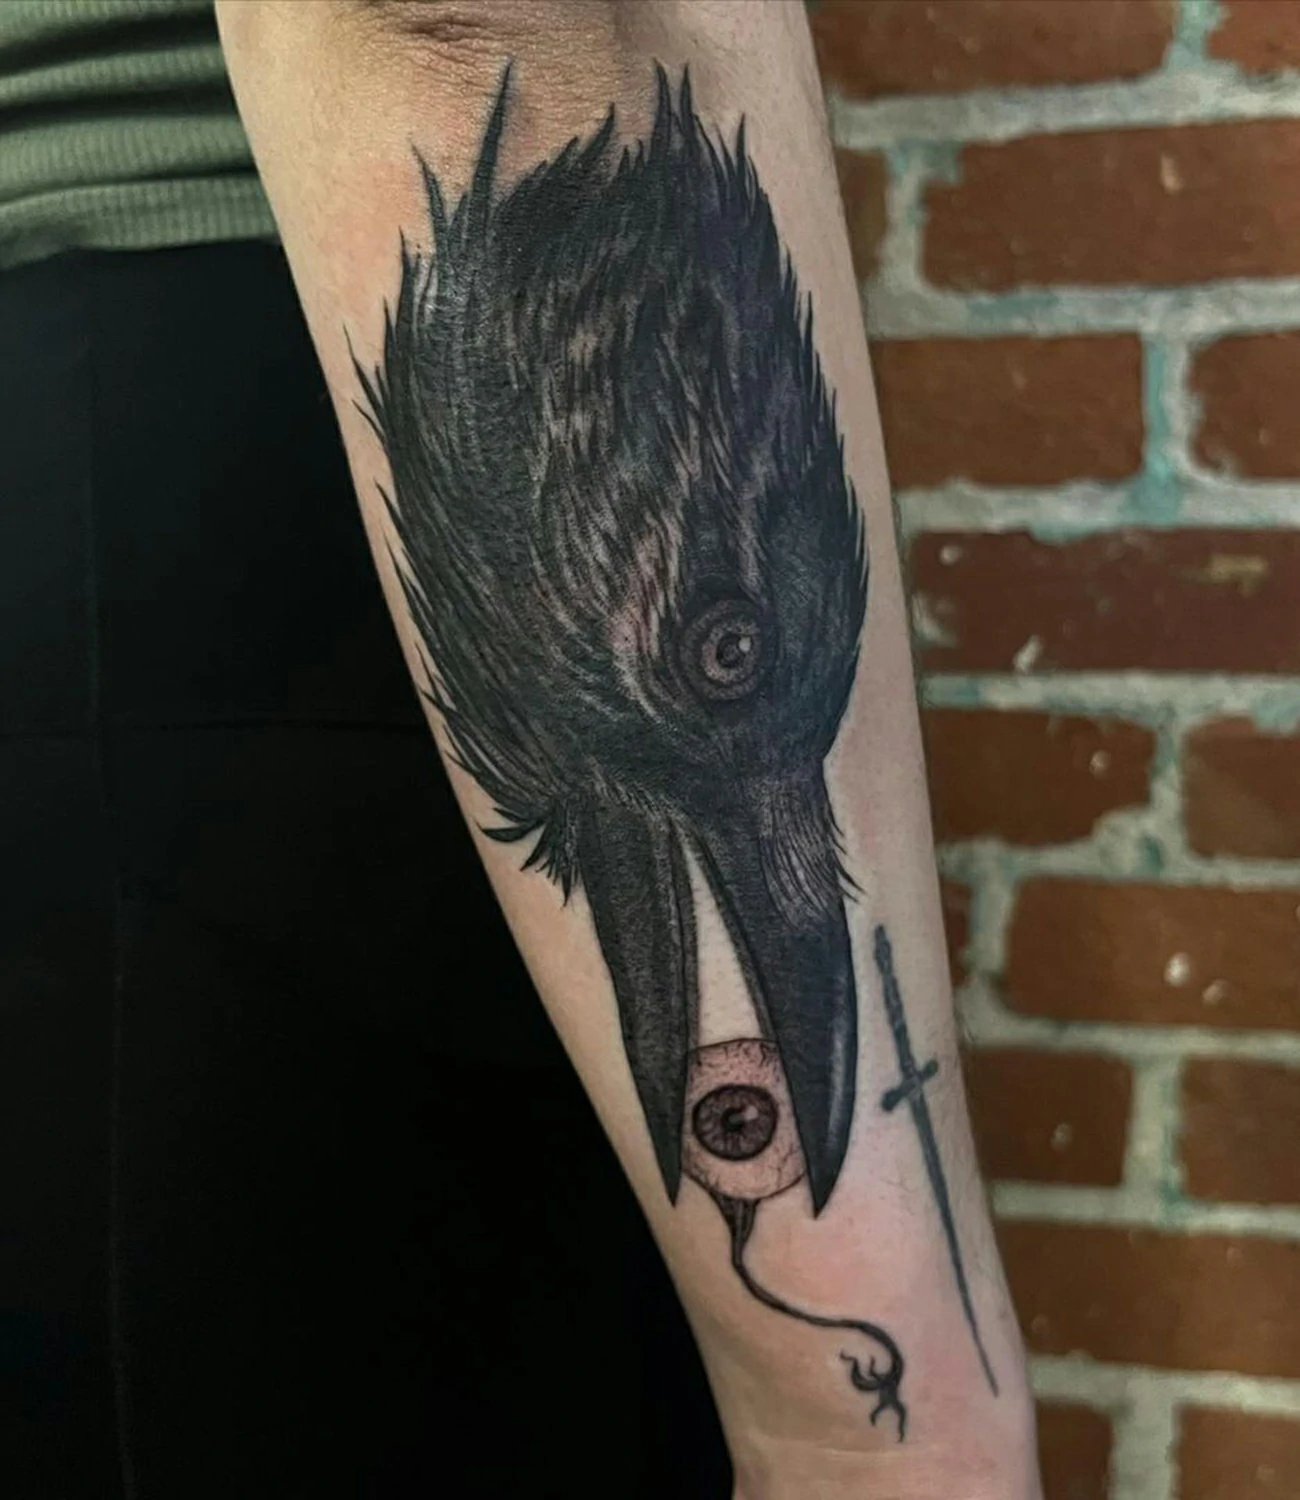 Raven head tattoo: A raven tattoo that prominently features the bird’s head.